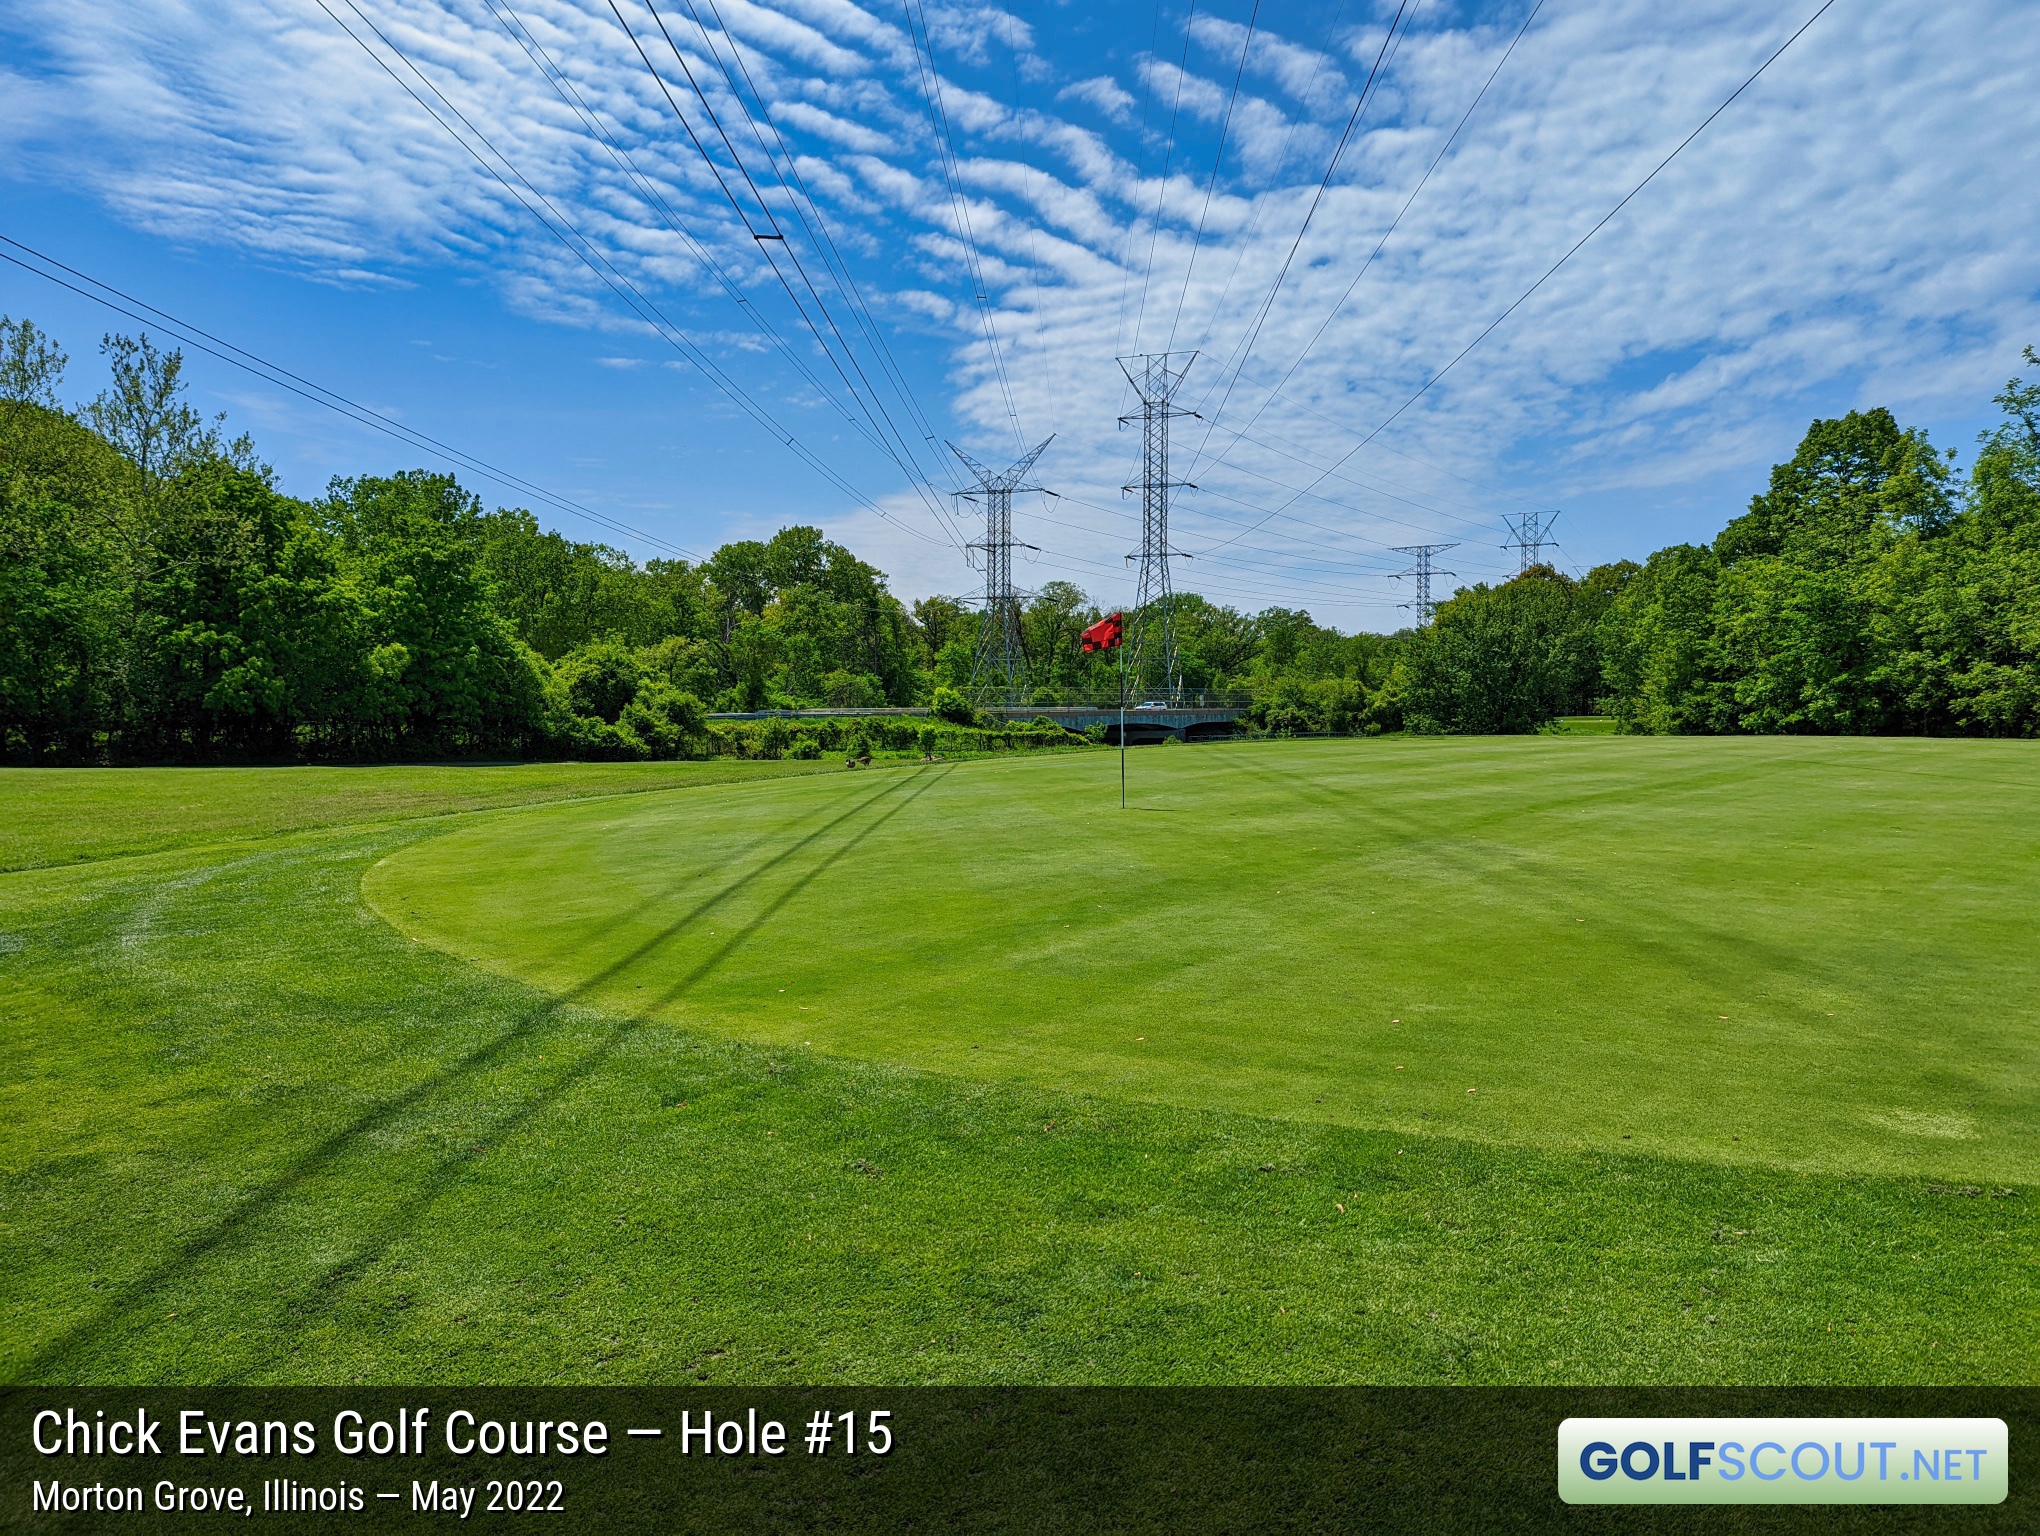 Photo of hole #15 at Chick Evans Golf Course in Morton Grove, Illinois. 